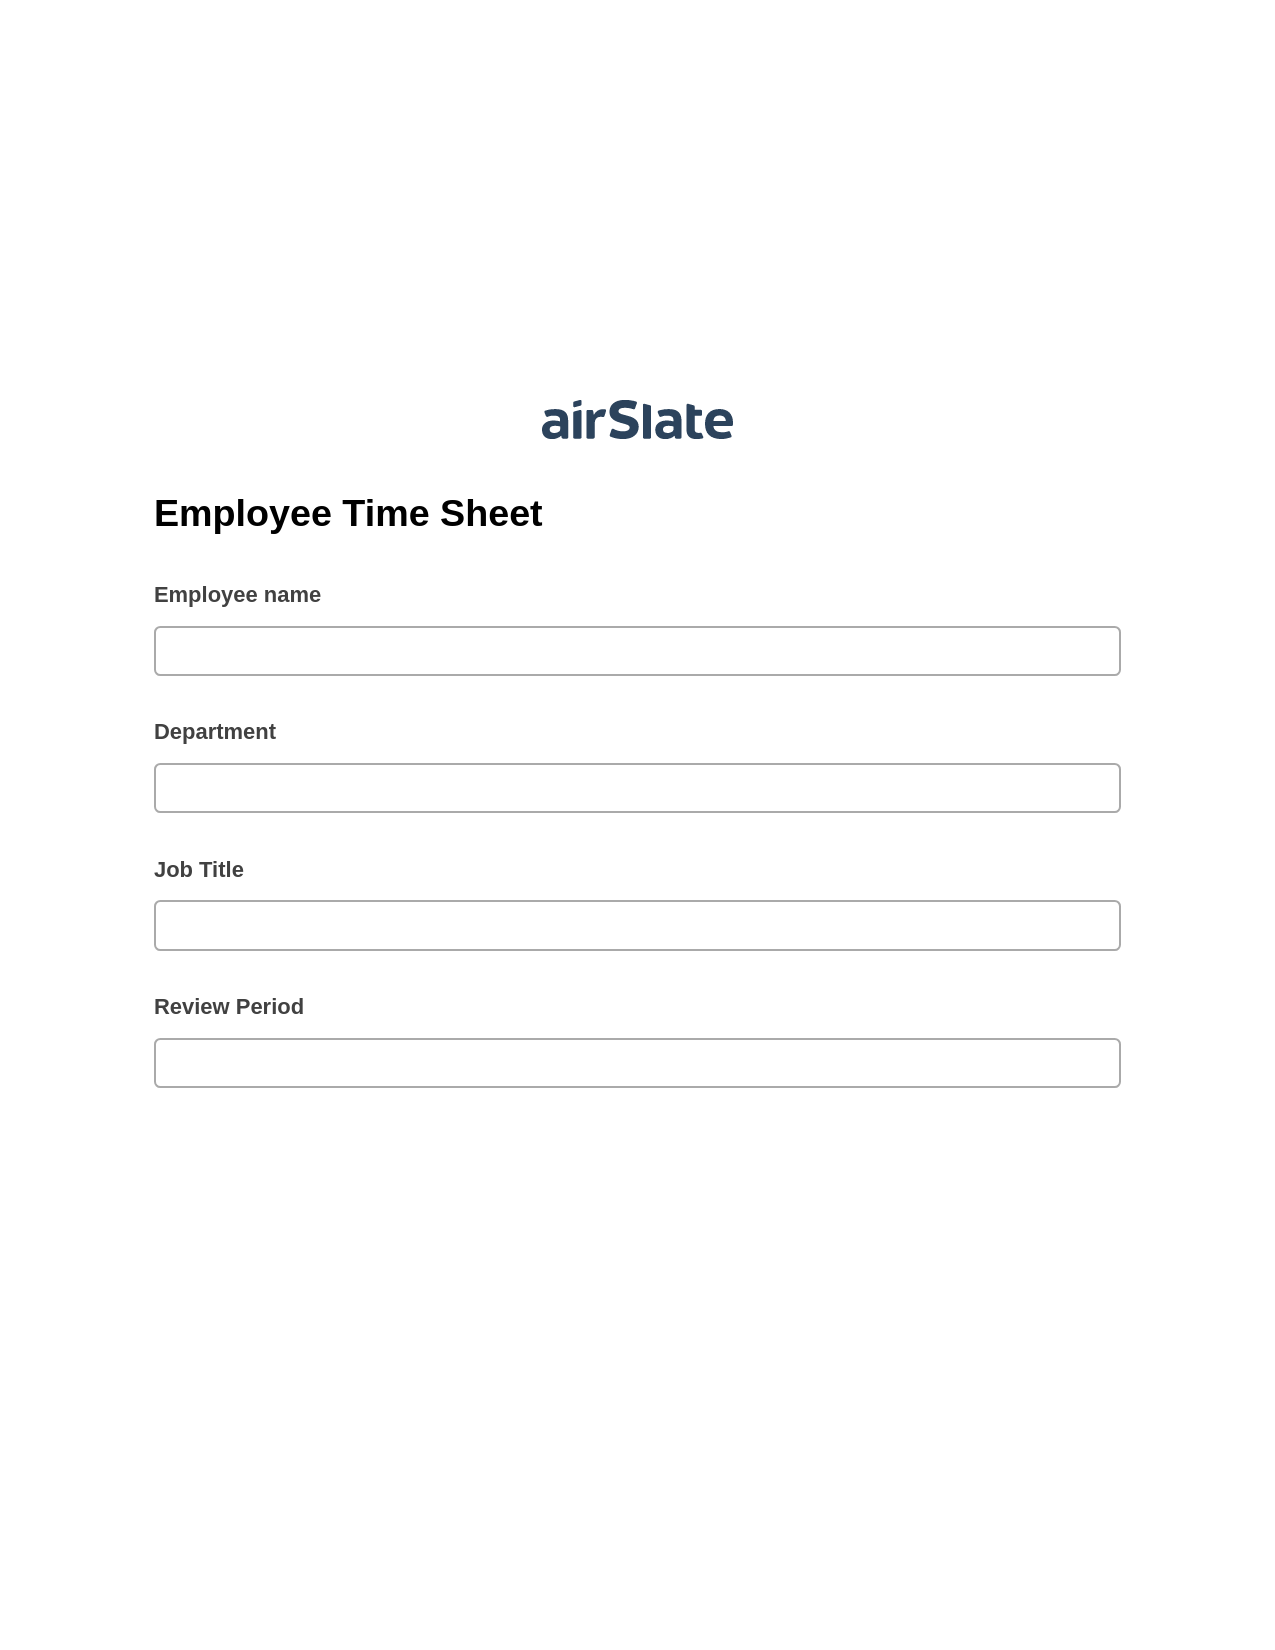 Multirole Employee Time Sheet Pre-fill Dropdowns from Airtable, Custom Field's Value Bot, Archive to SharePoint Folder Bot